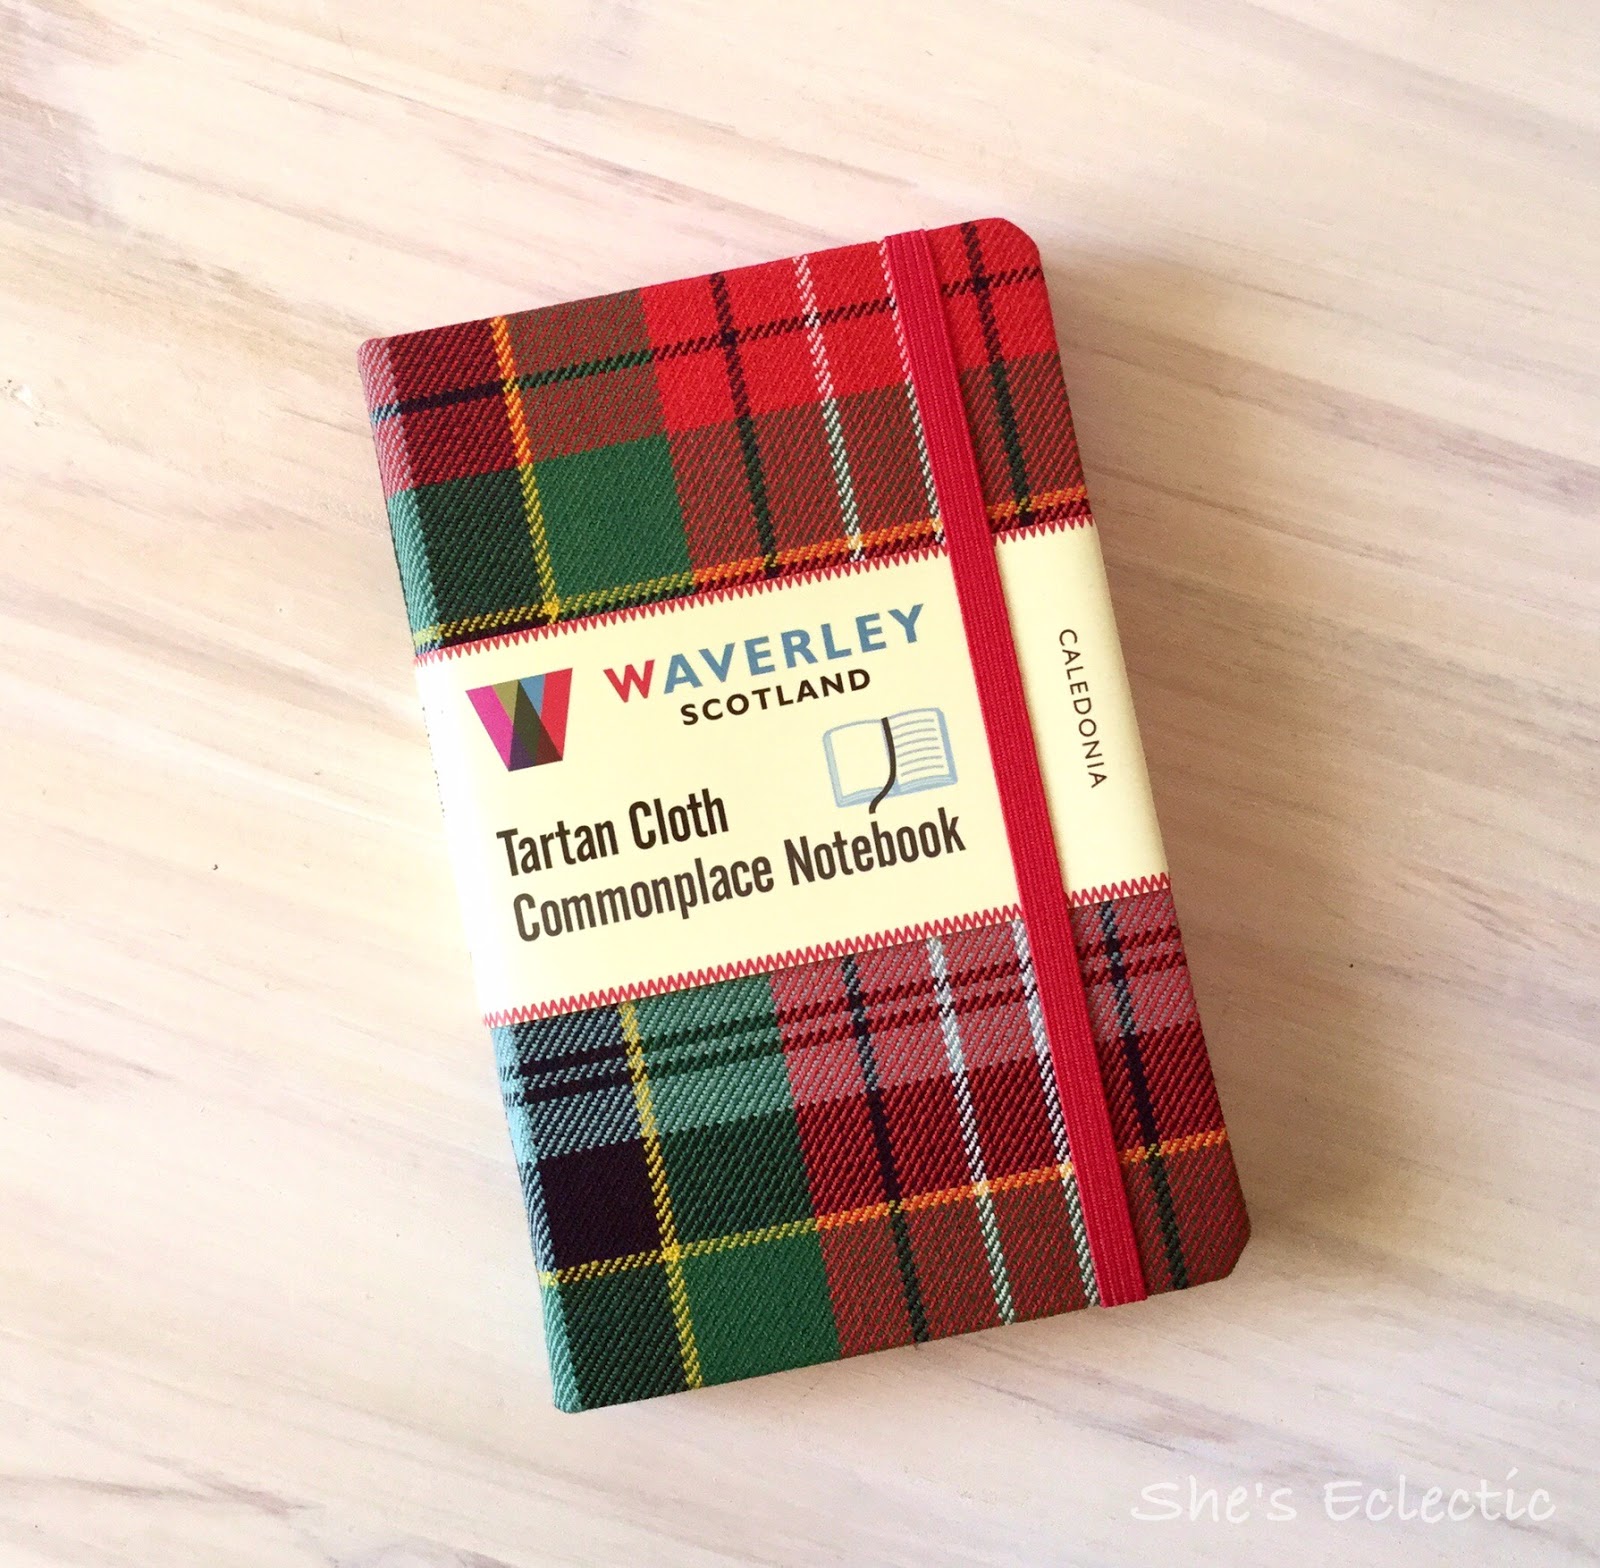 She's Eclectic: Waverley Scotland - Tartan Cloth Commonplace Notebook ...